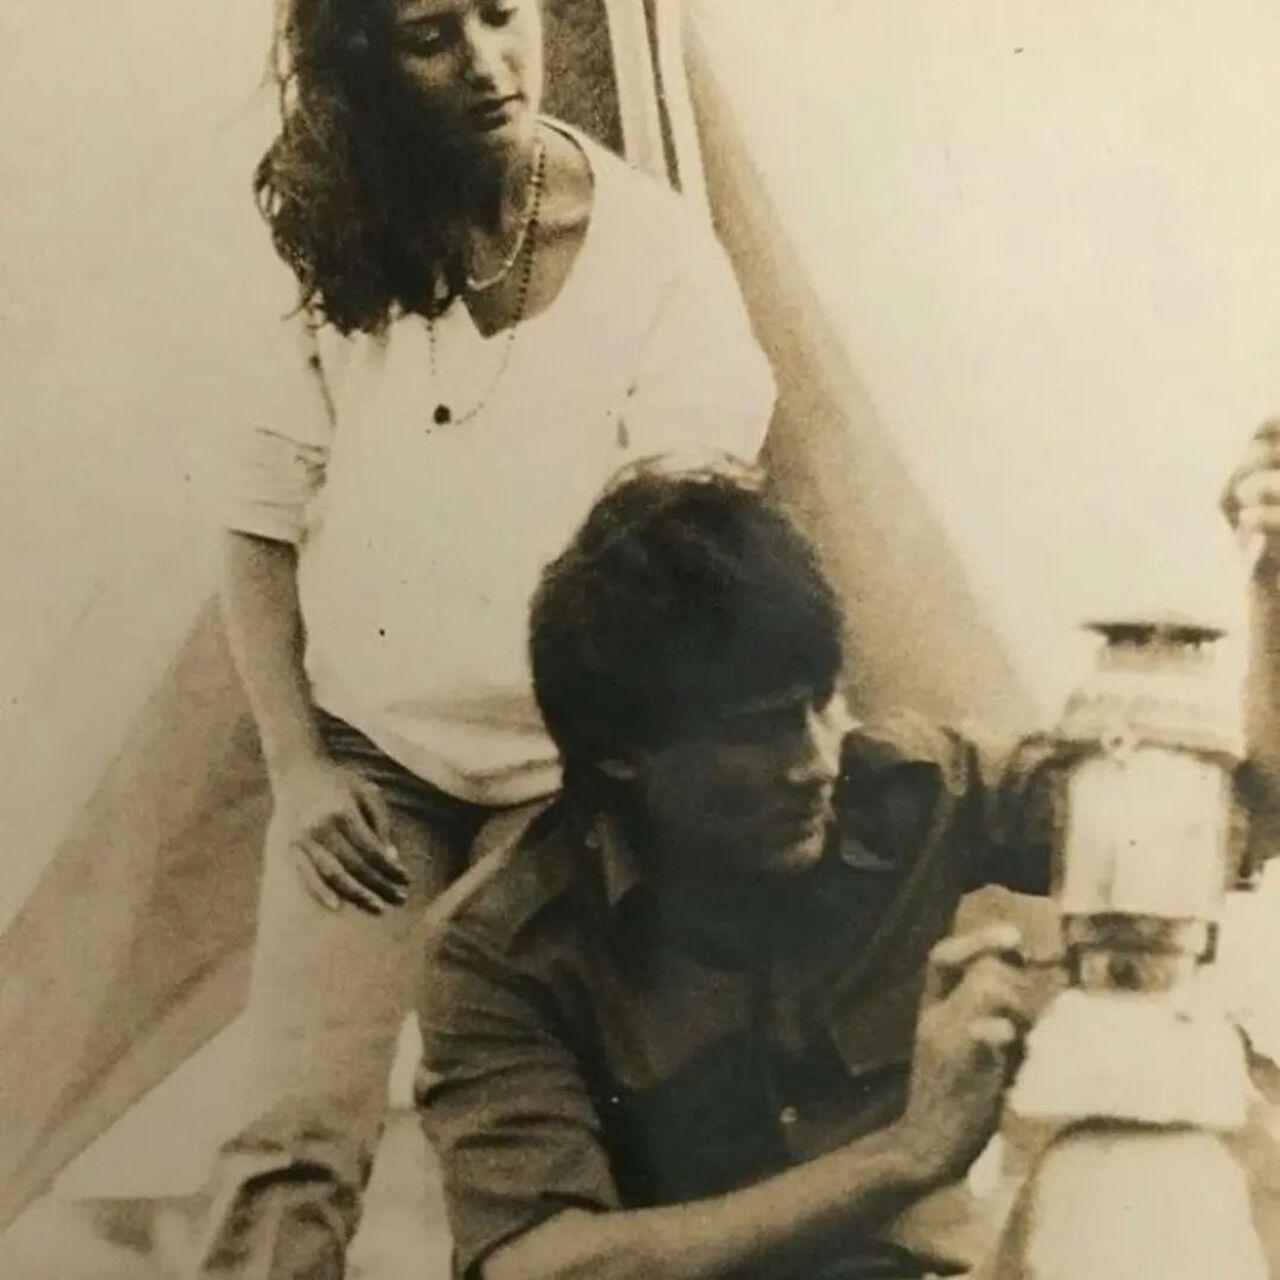 Jackie and Ayesha got married in 1987. They are parents to two successful kids- Tiger Shroff and Krishna Shroff. While Tiger pursued a career in the movies, his sister pursued fitness